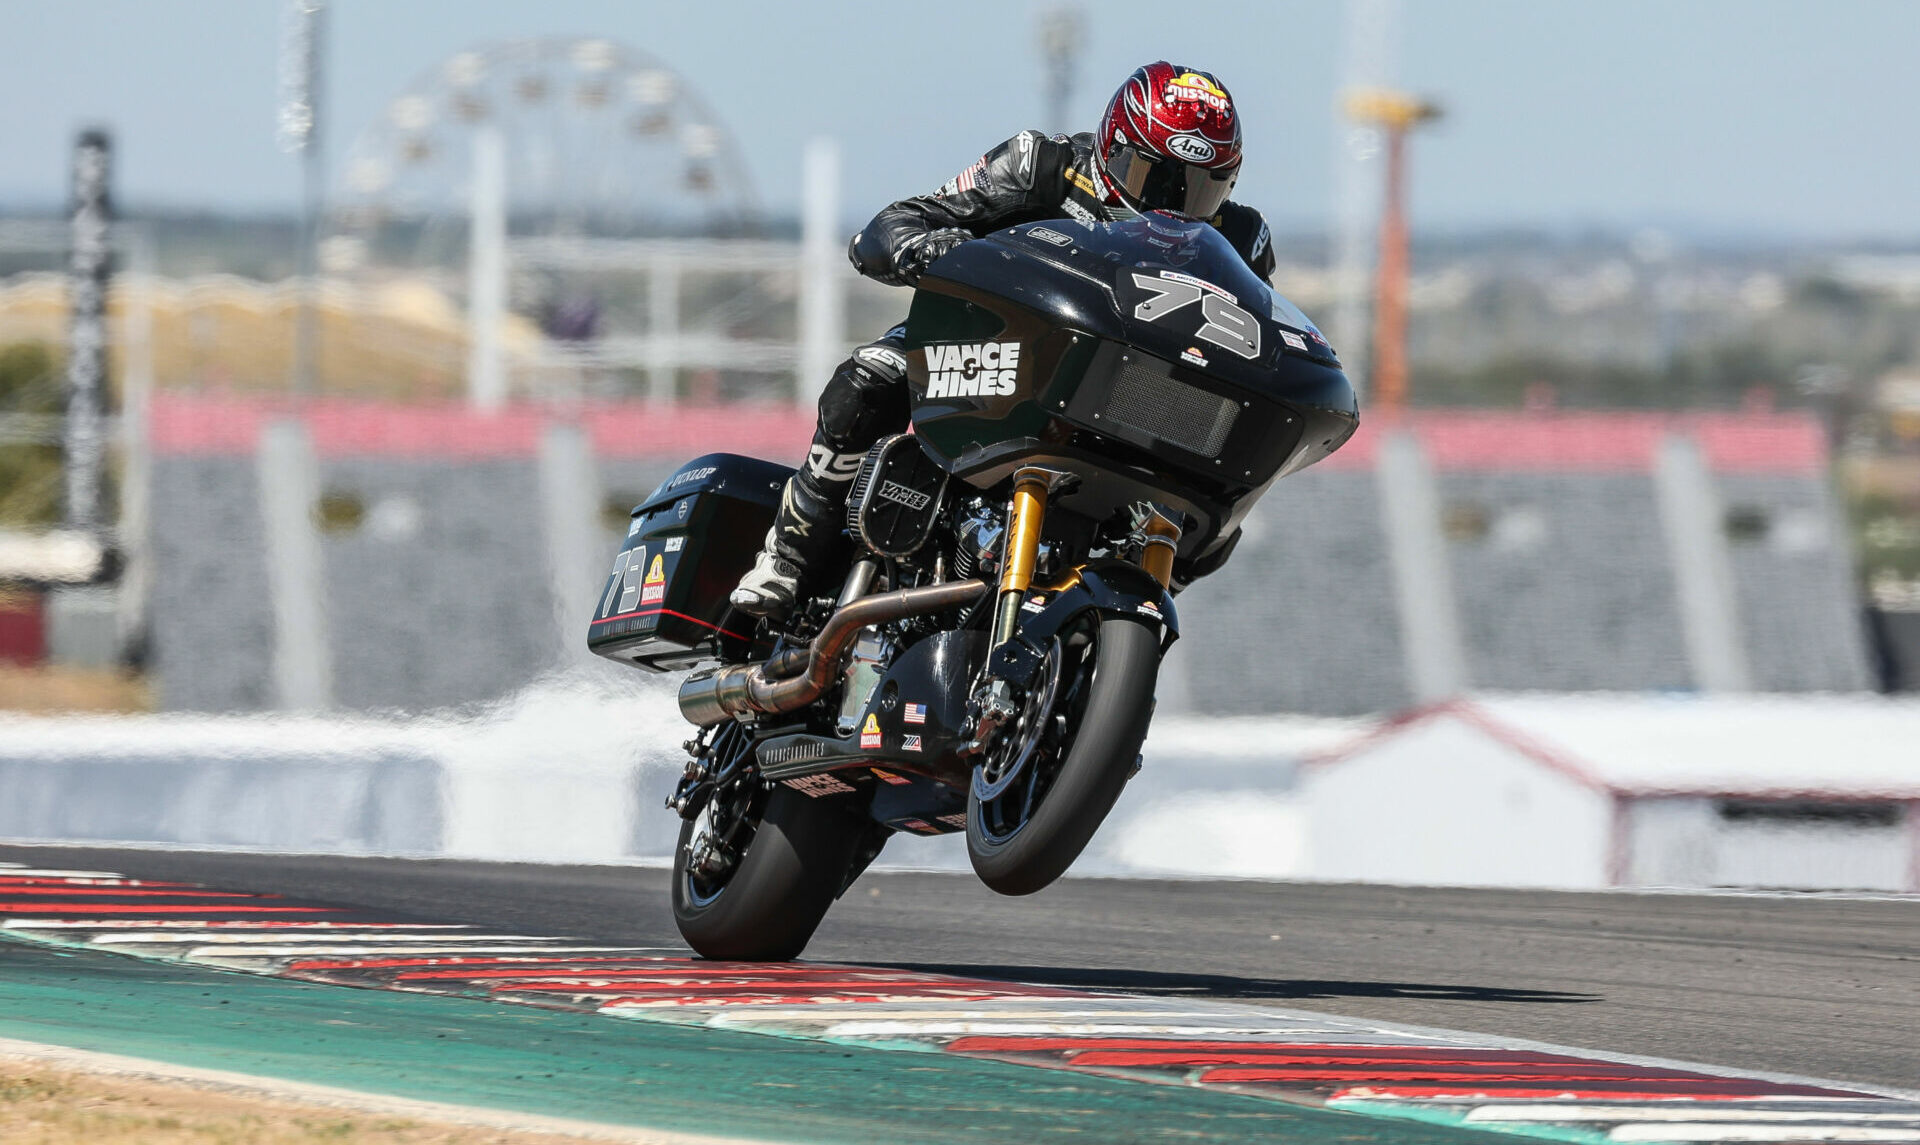 Hayden Gillim (79) on his Vance & Hines/Mission Foods Harley-Davidson during the 2024 MotoAmerica Mission King Of The Baggers Championship, which he won. Photo by Brian J. Nelson.